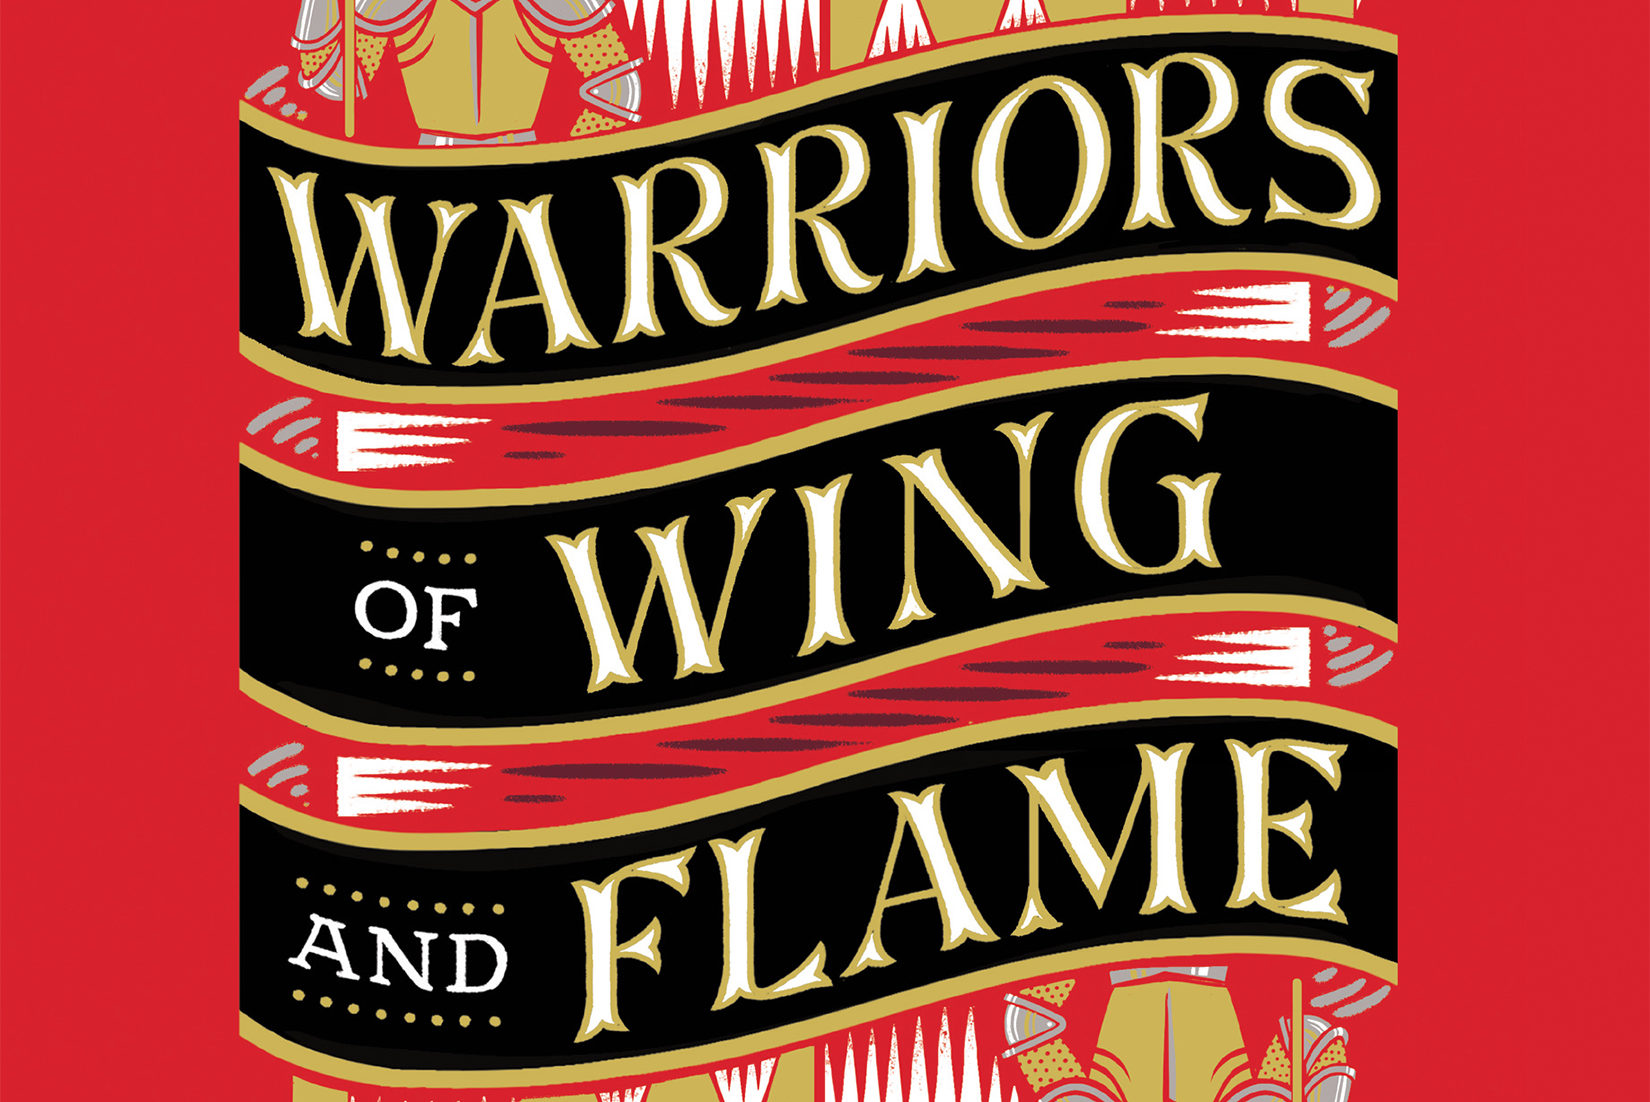 Check Out Our Cover Reveal for <i>Warriors of Wing and Flame</i> by Sara B. Larson AND Read the First Chapter!